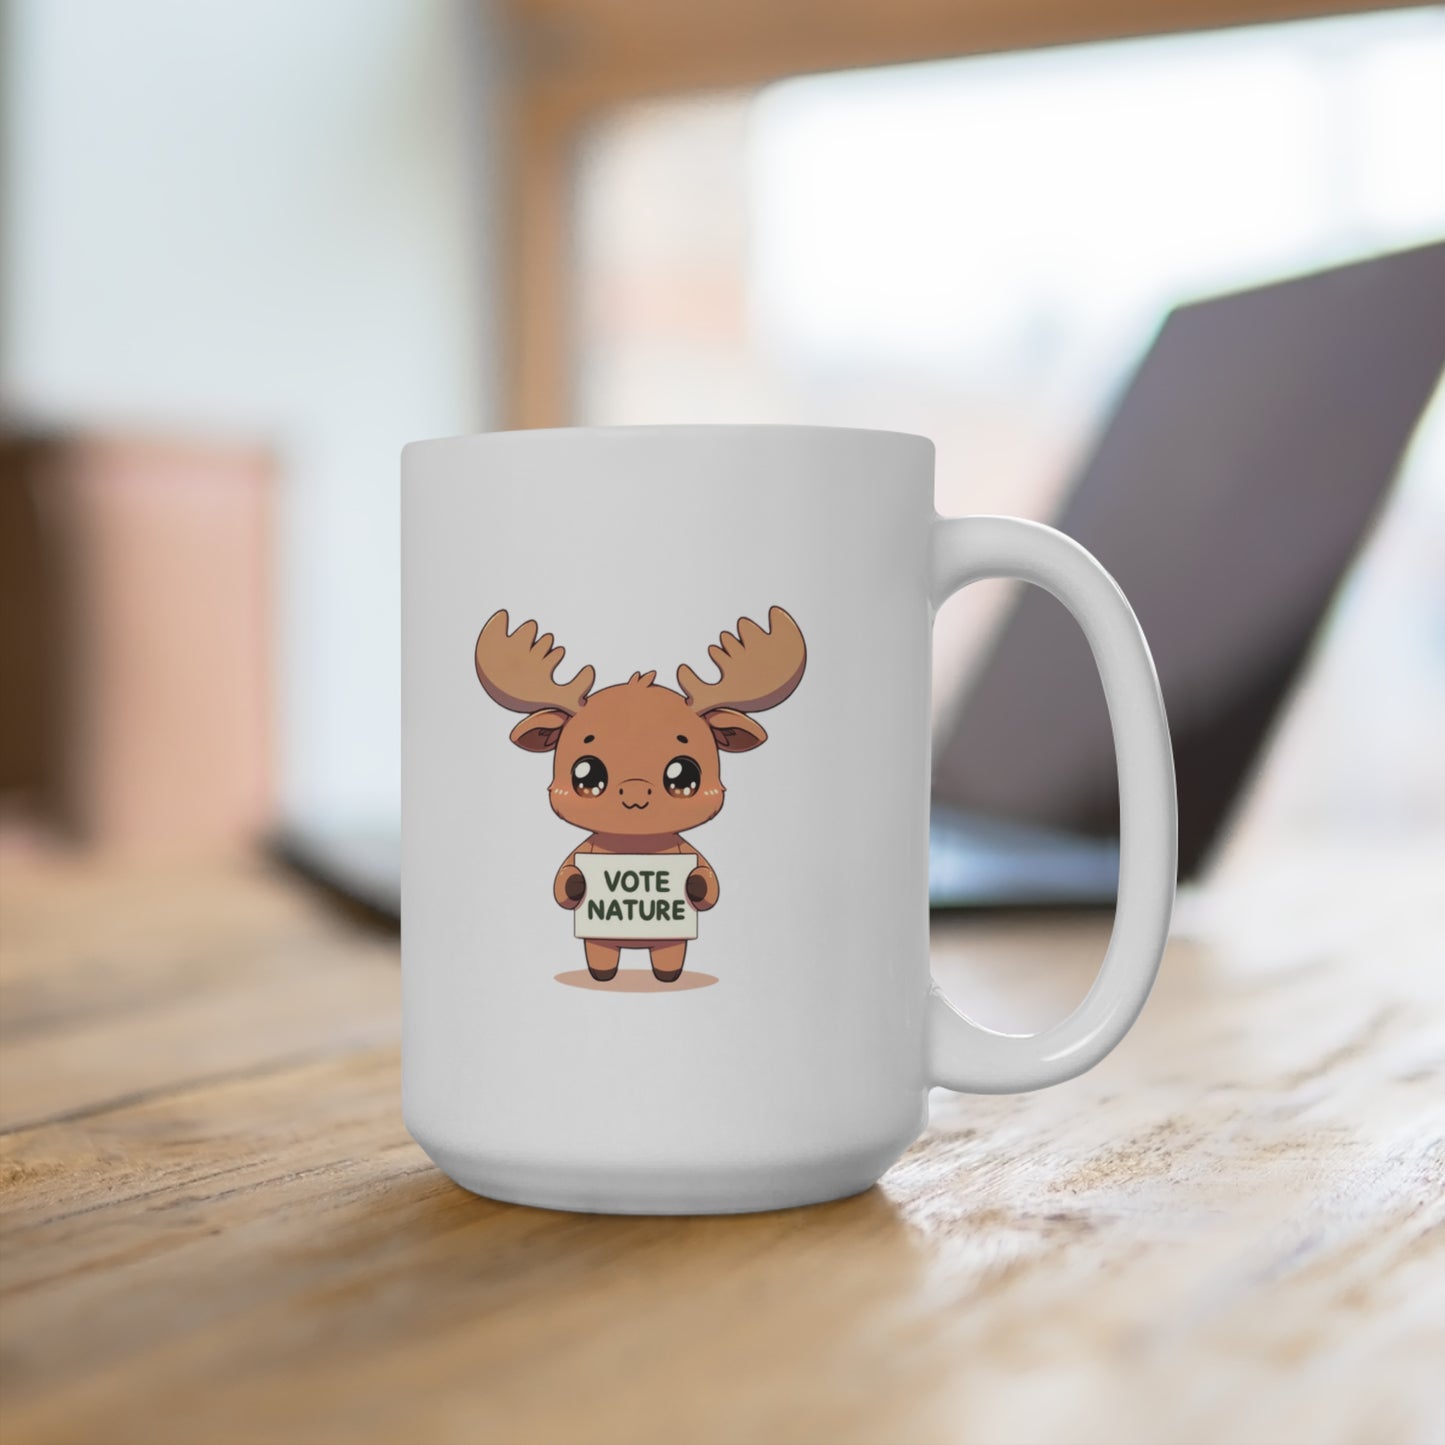 Inspirational Cute Moose Statement Coffee Mug (15oz): Vote Nature! Be a cute activist bunny!